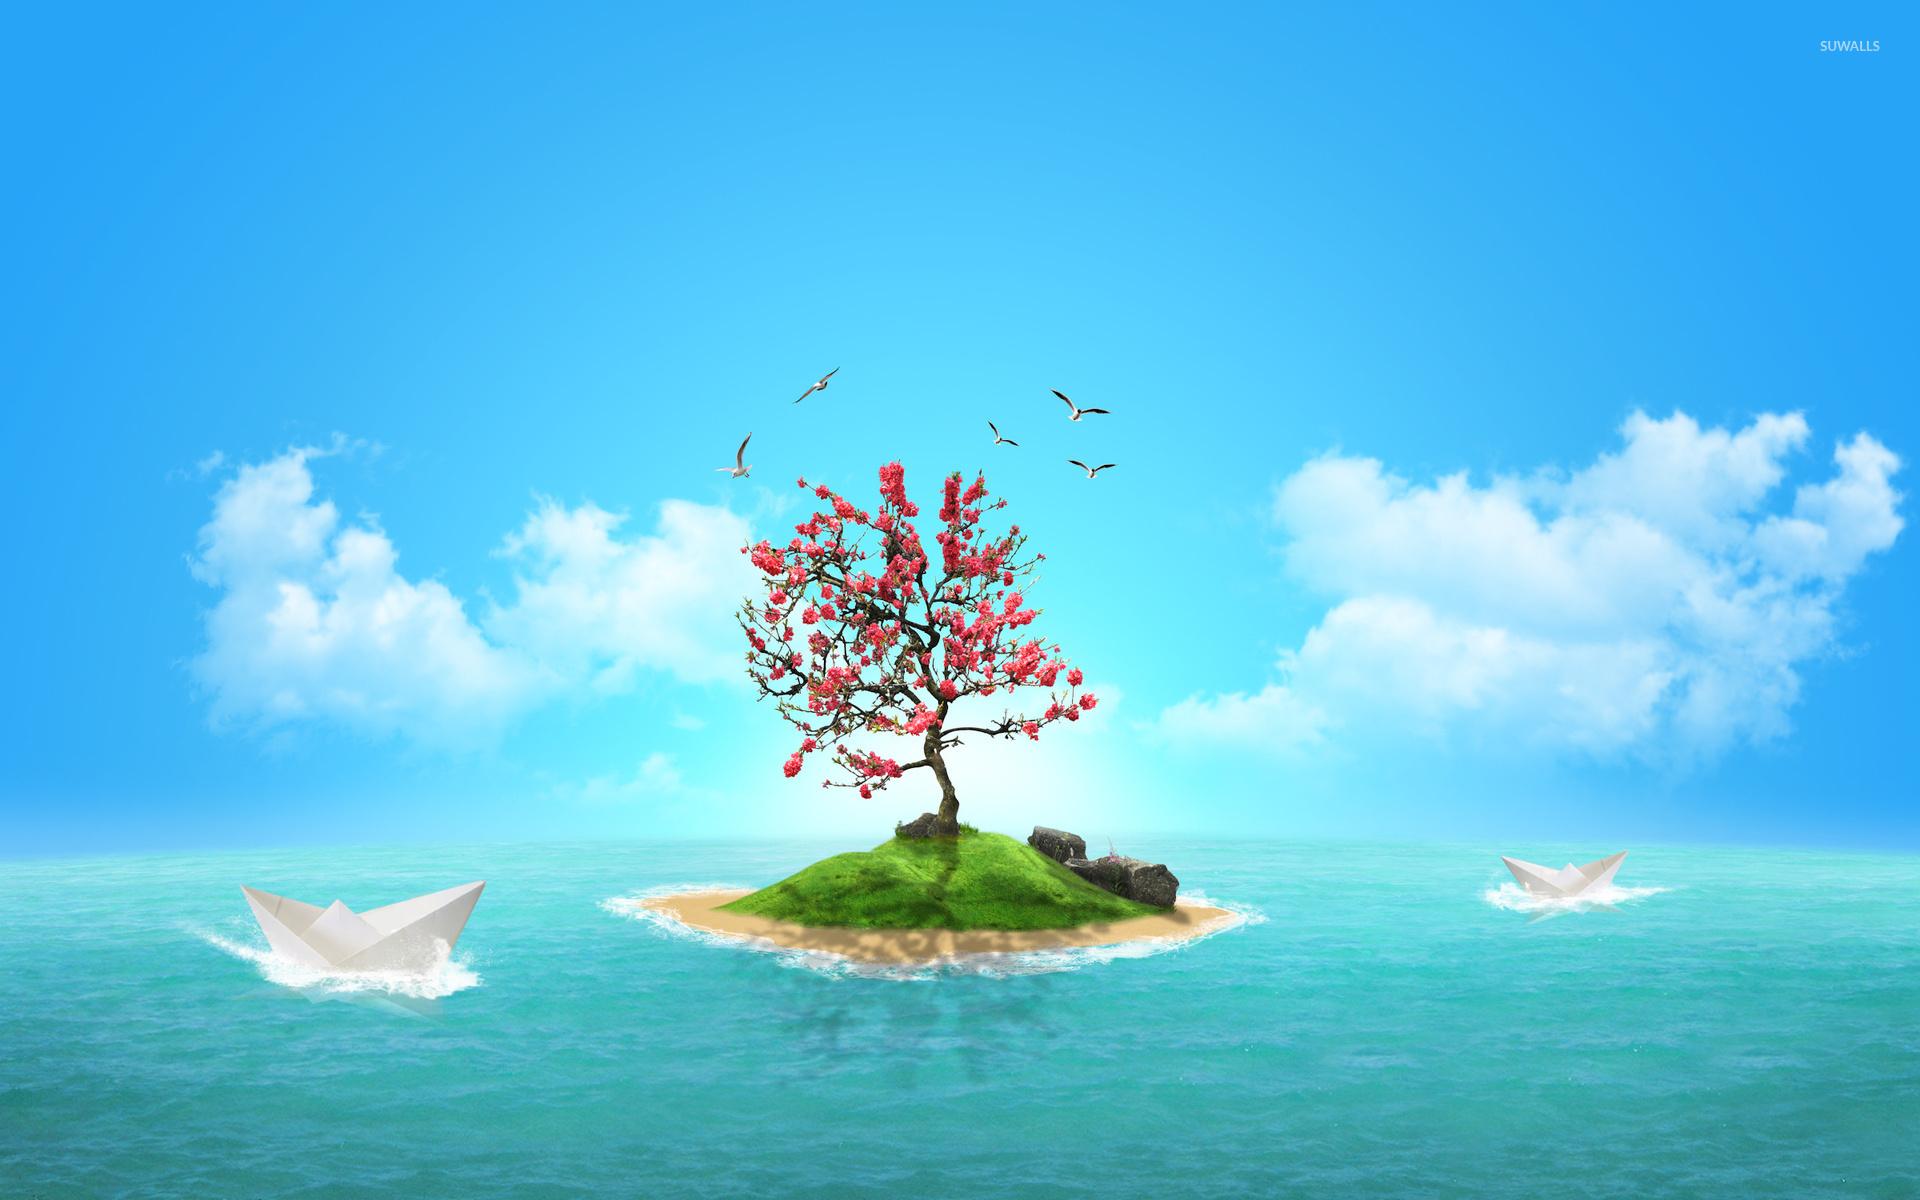 Paper boats by the small island wallpaper Art